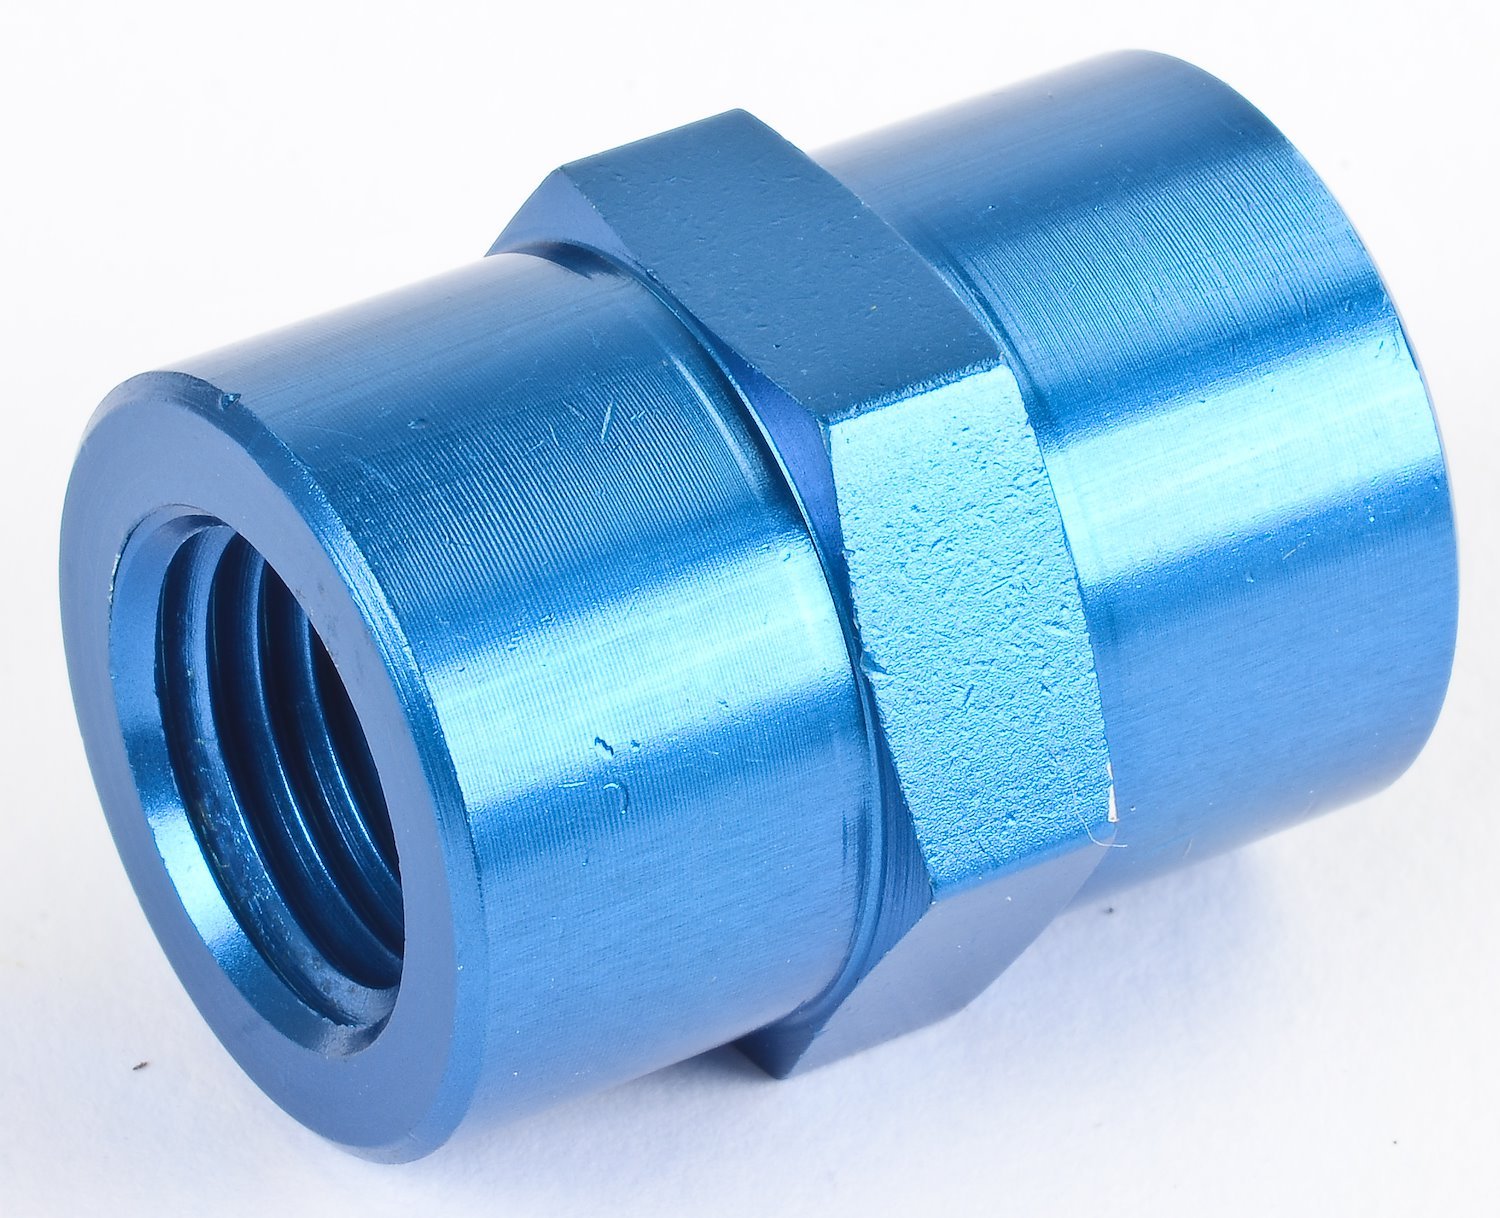 NPT to NPT Union Fitting [1/4 in. NPT Female to 1/4 in. NPT Female, Blue]